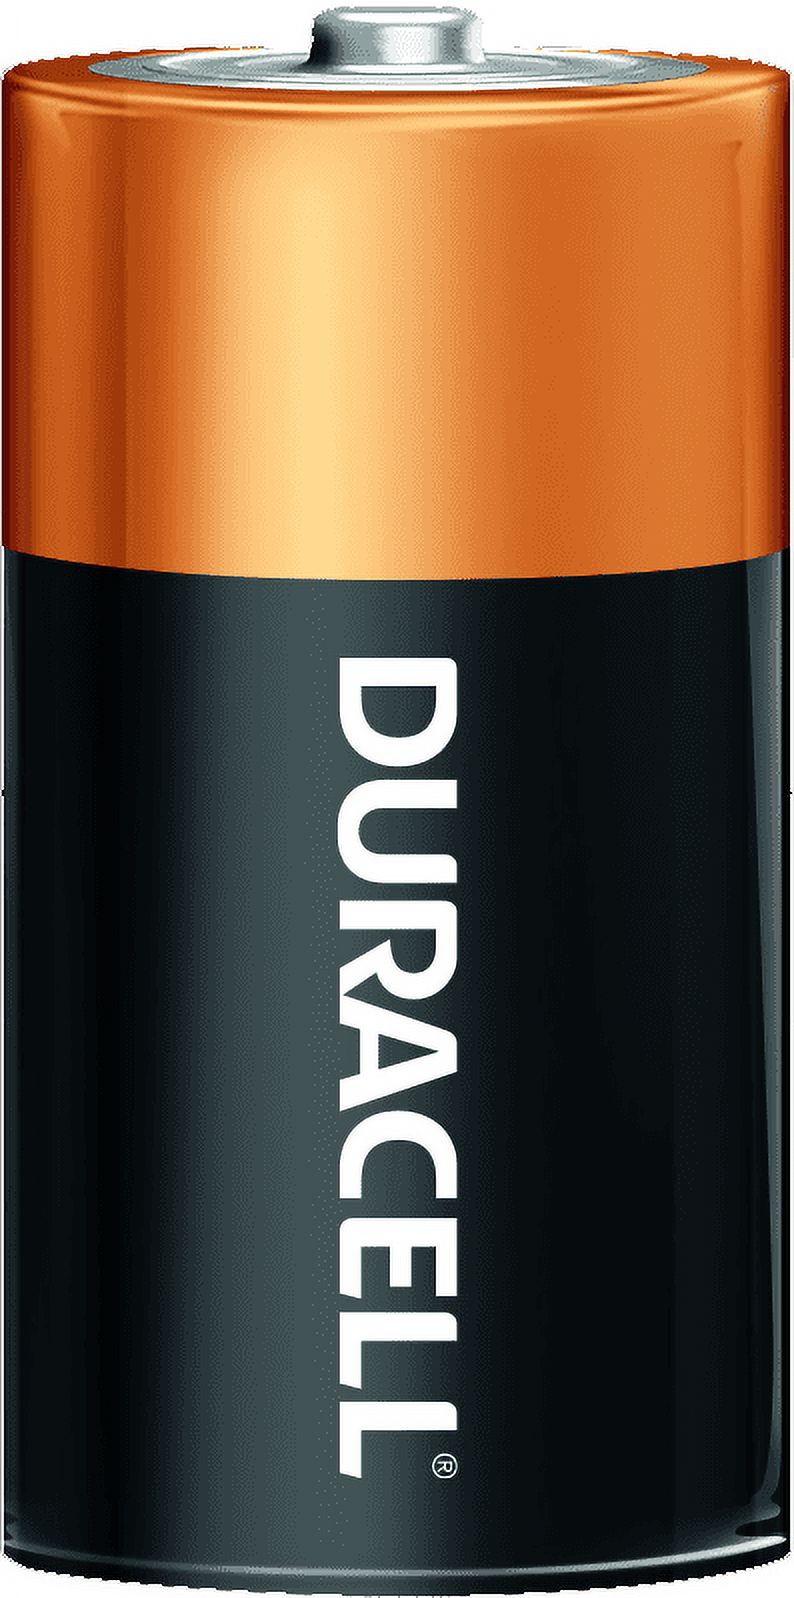 Duracell Coppertop C Battery, Long Lasting C Batteries, 8 Pack - image 4 of 7